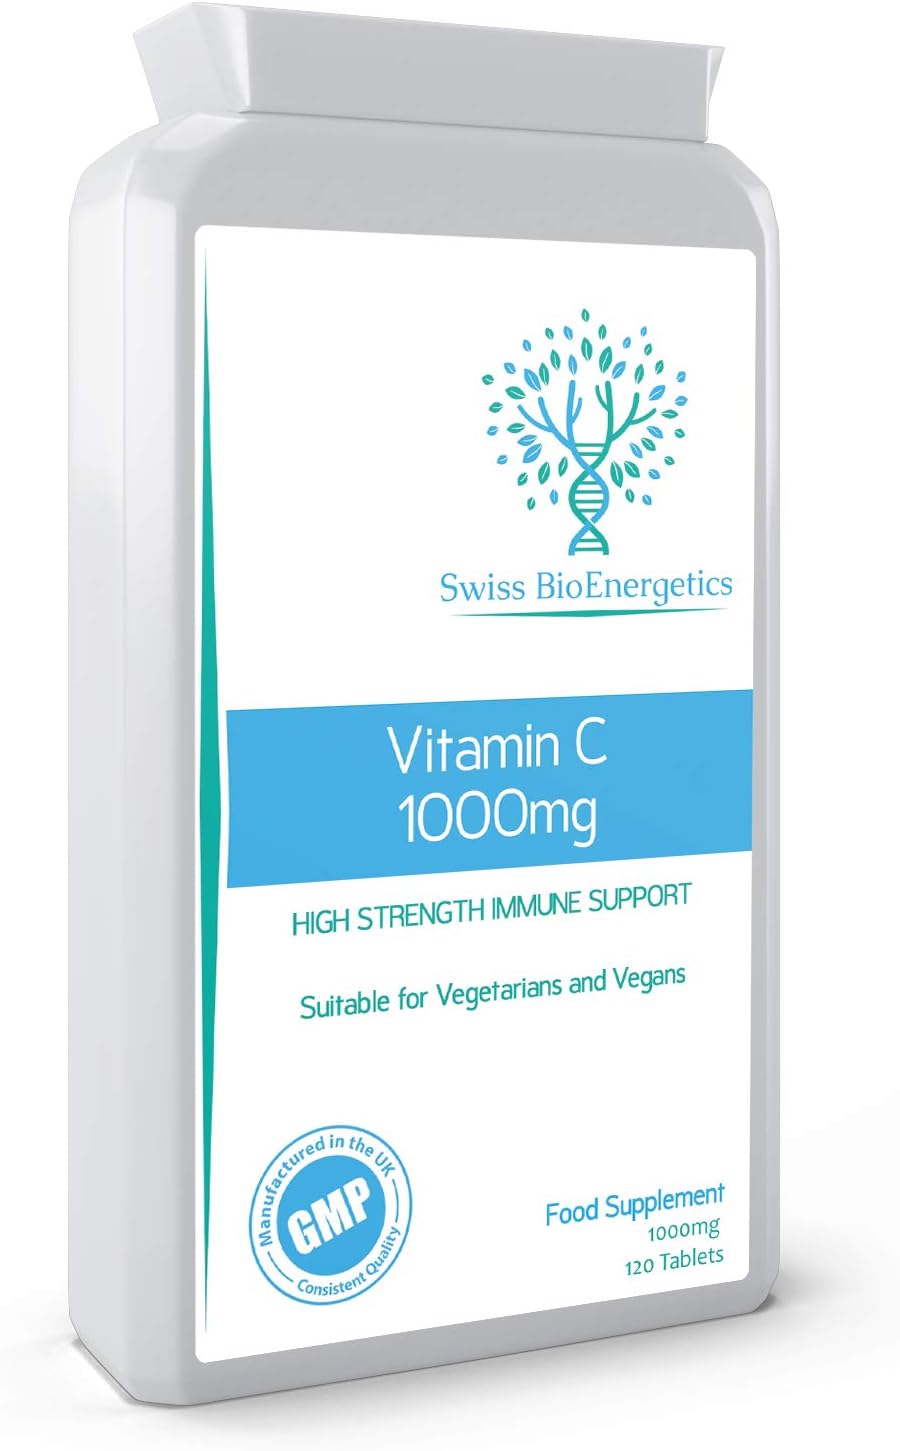 Vitamin C 1000mg 120 Tablets ? High Strength Immune Support contribute195 Grams